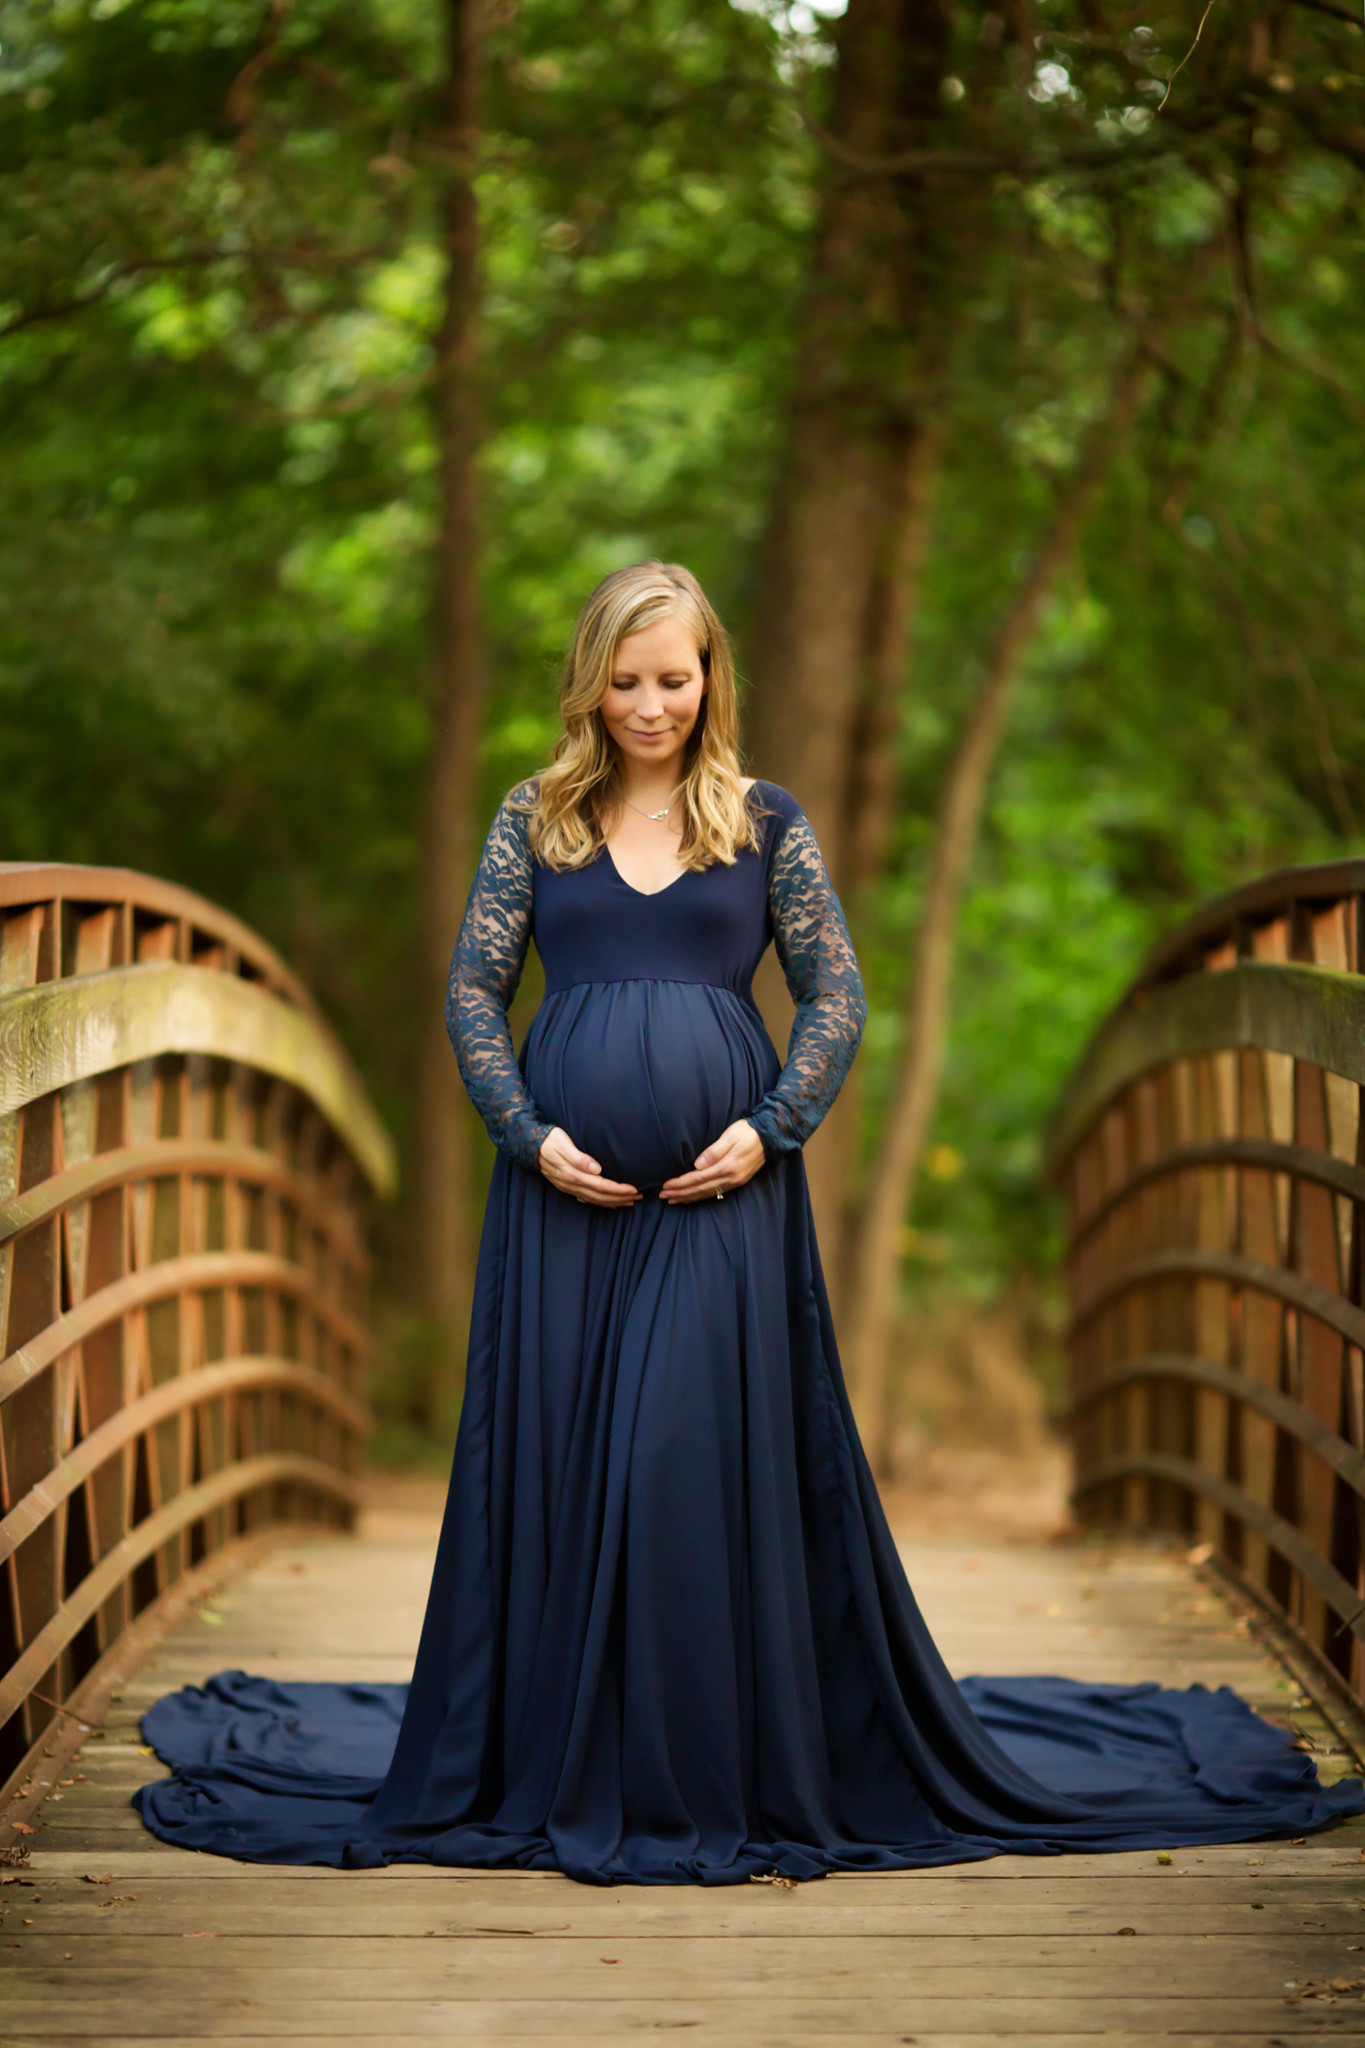 Flowy-Maxi-Dress-.-1 Hottest 25 Maternity Photoshoot Outfit Ideas